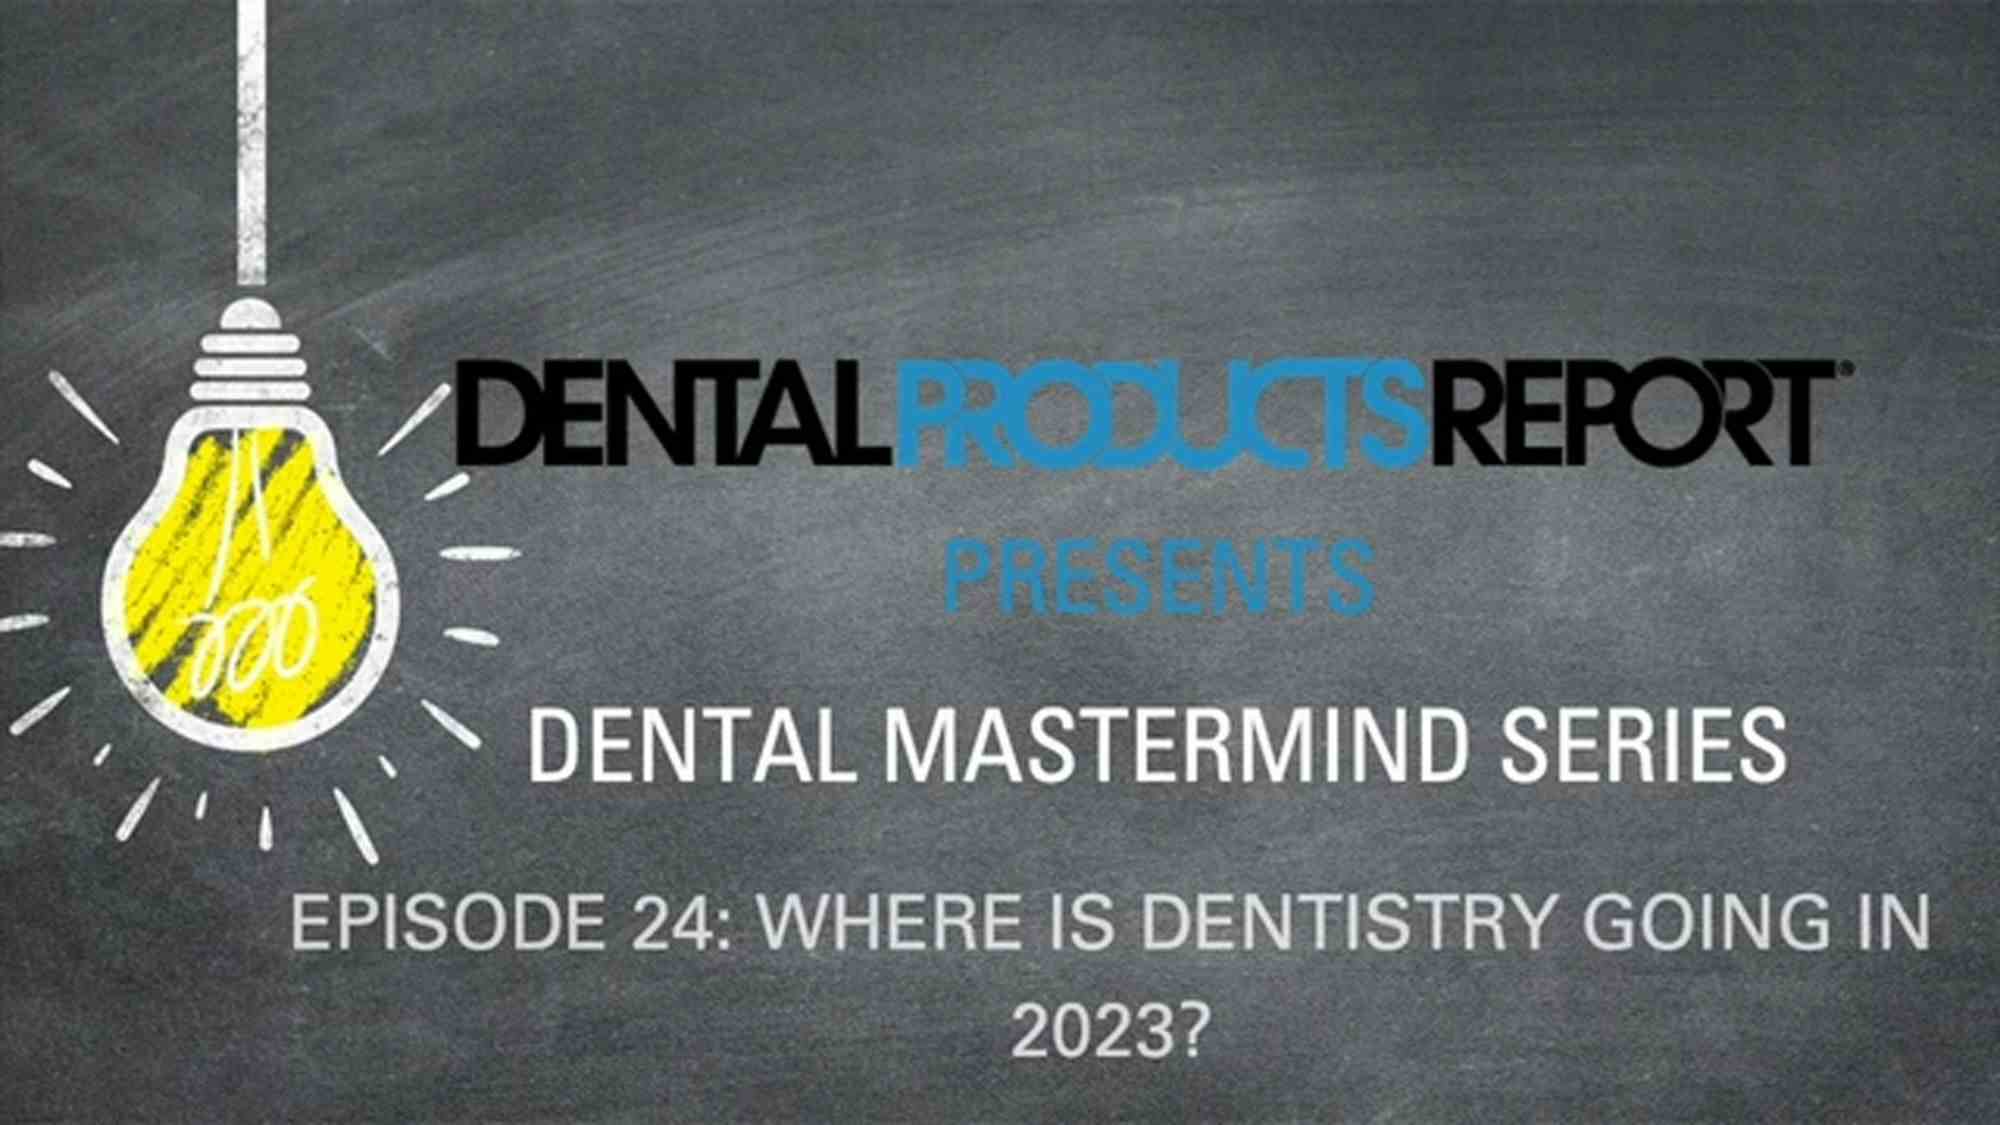 Mastermind - Episode 24 - Where is Dentistry Going in 2023?